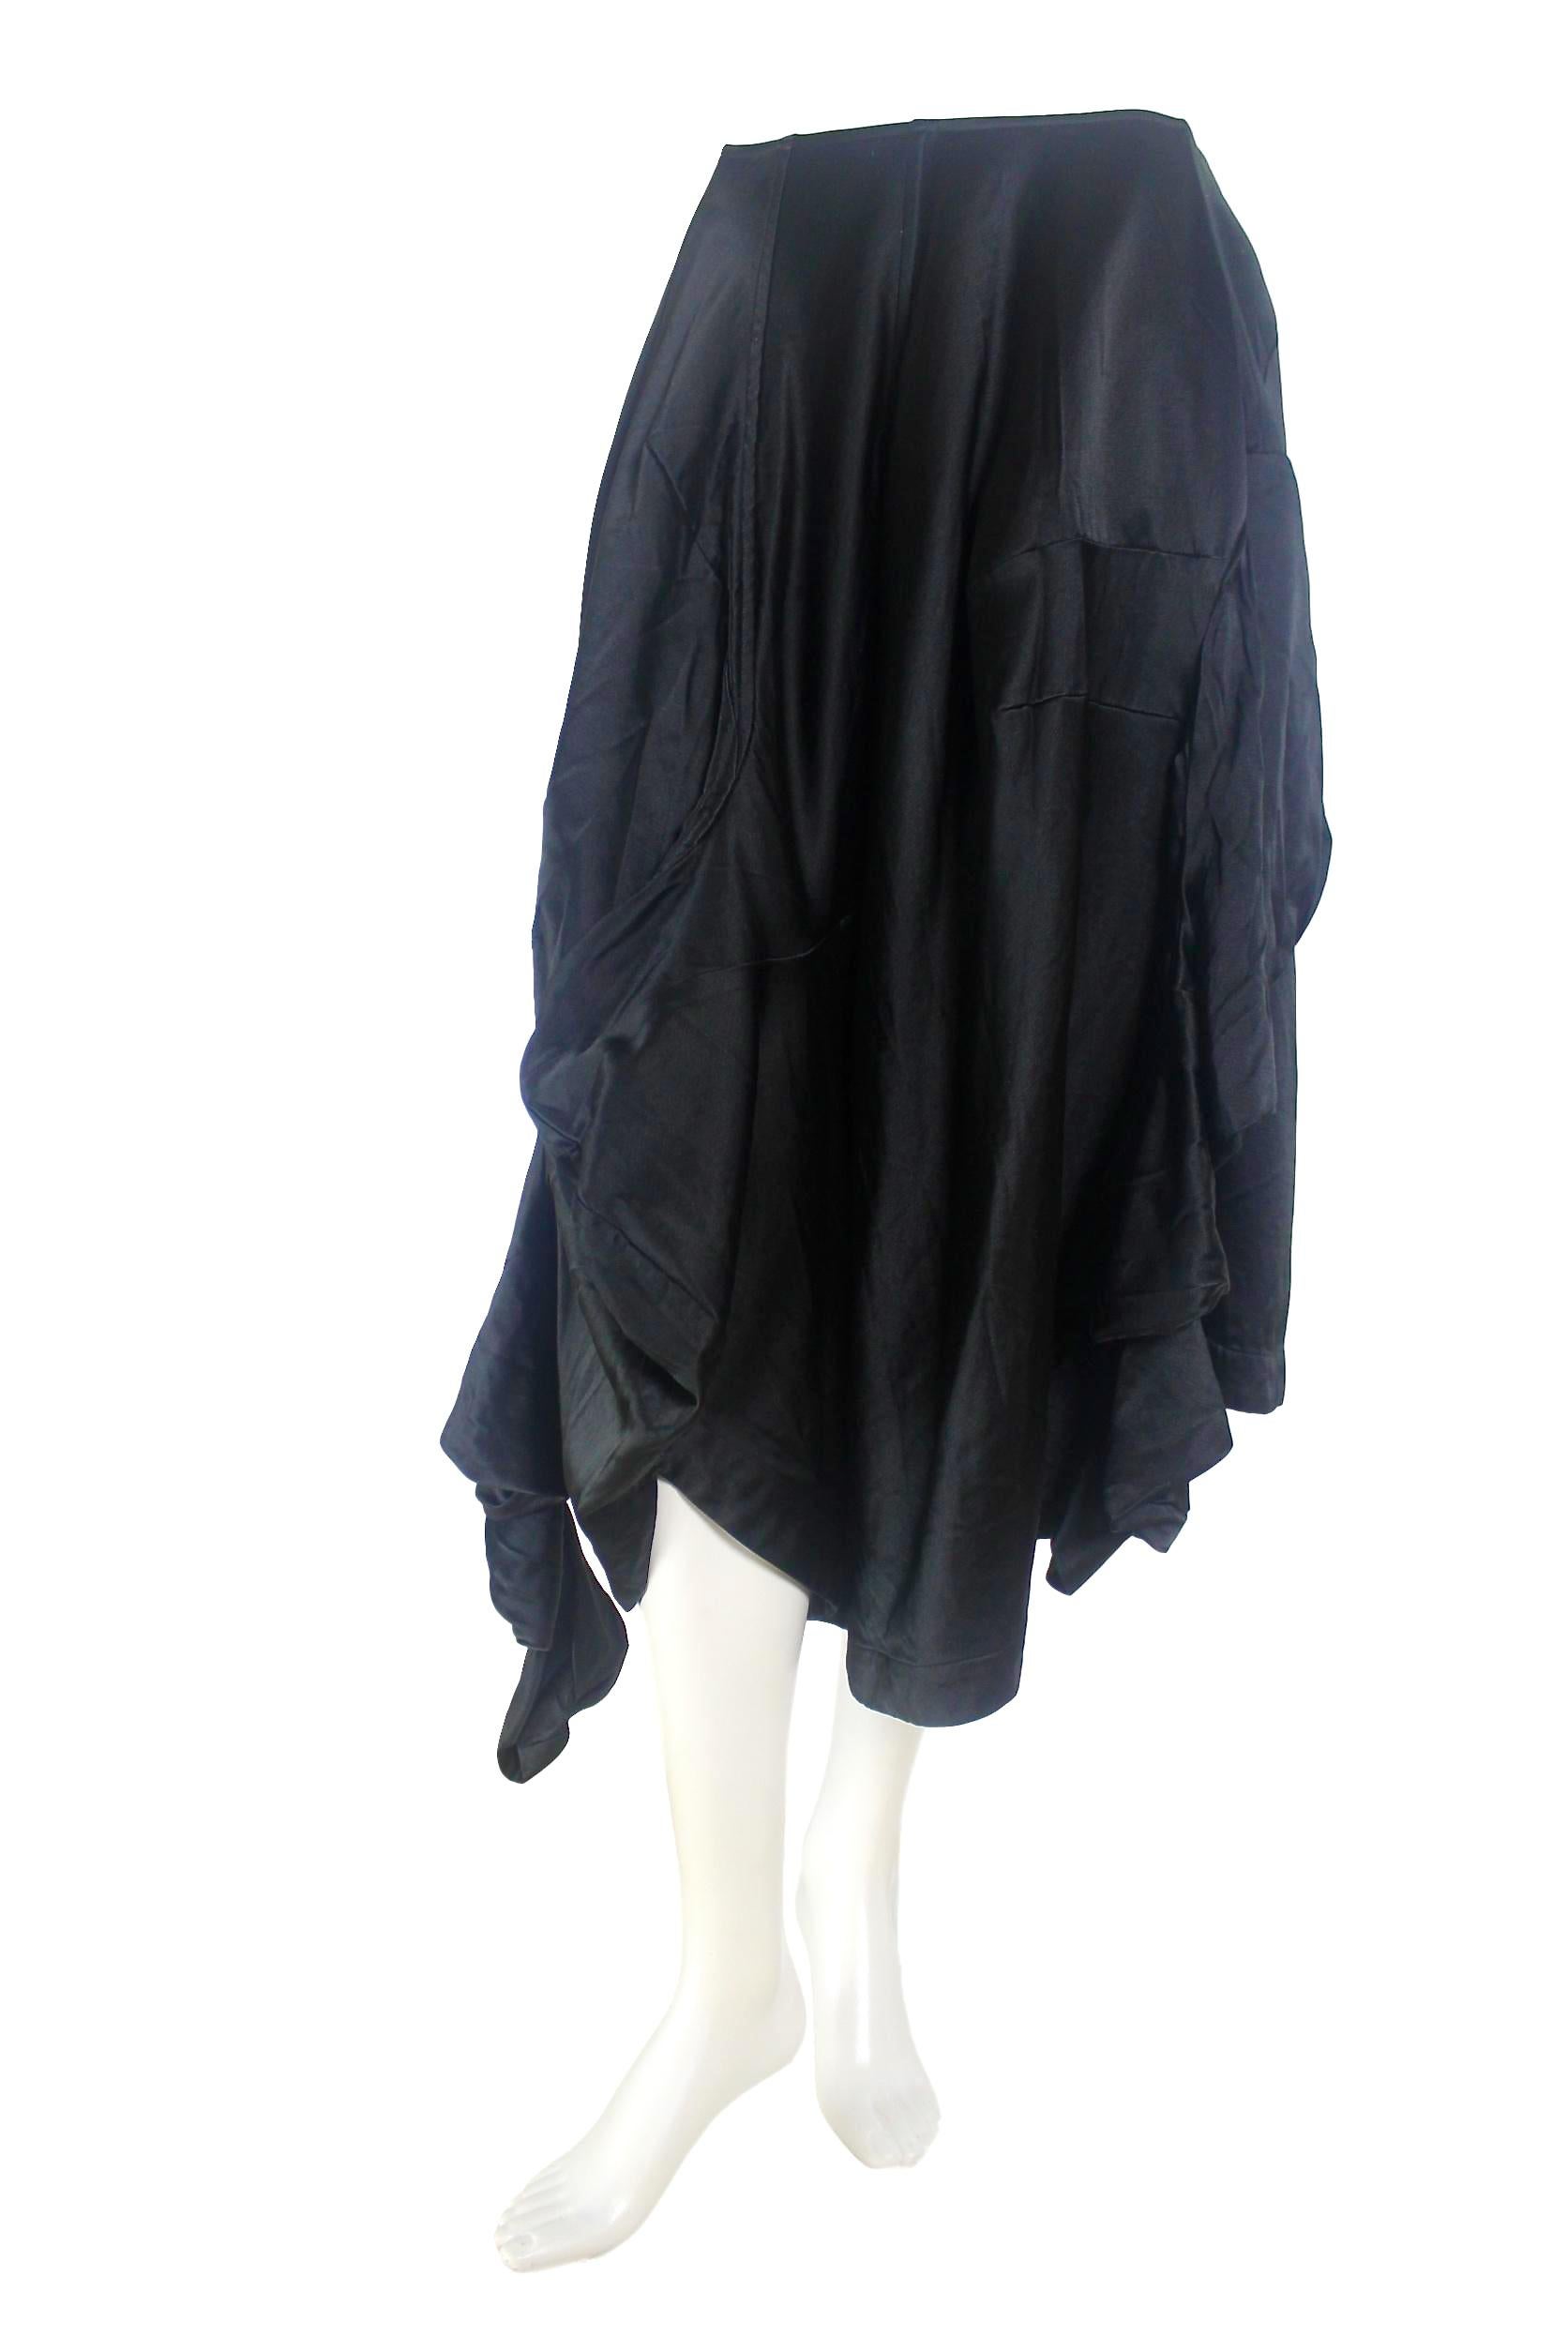 Comme des Garcons Wool/Silk Twisted Sleeve Skirt AD 2004 Dark Romance For Sale 8